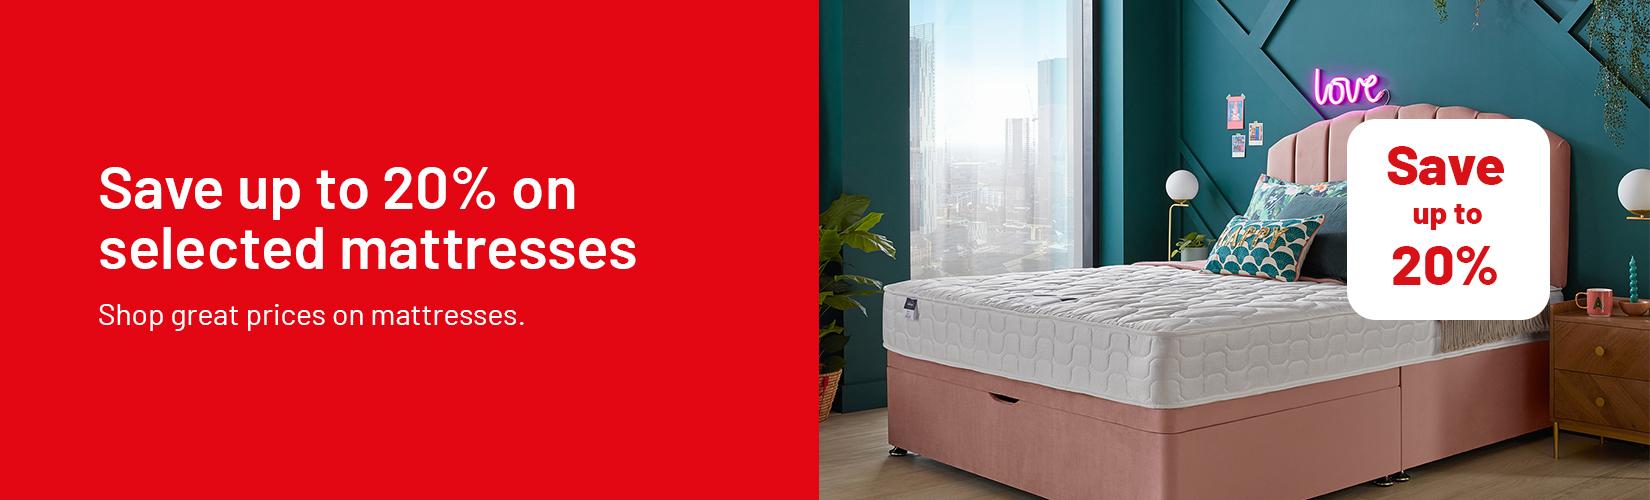 Save up to 20% on selected mattresses. Shop great prices on mattresses.